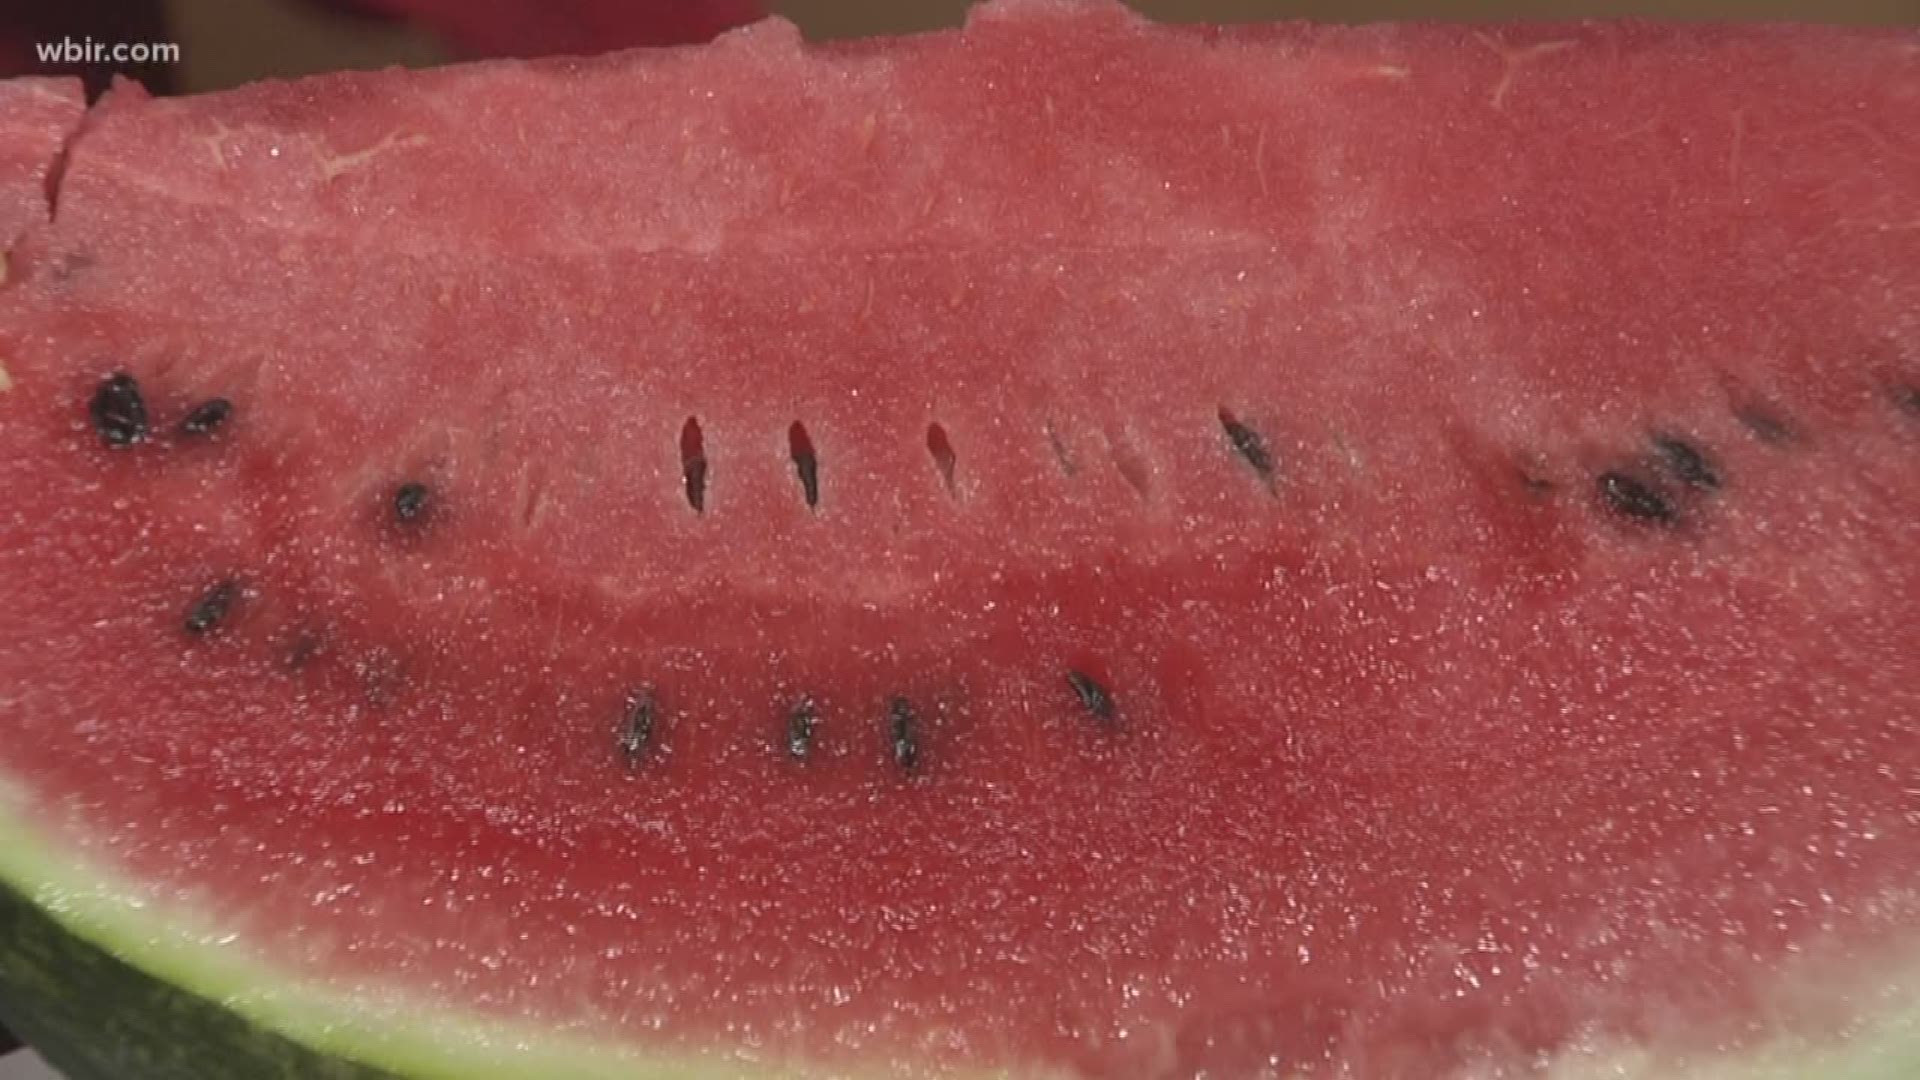 Heather Pierce from Blount Memorial Hospital shares four ways to use watermelon this summer.